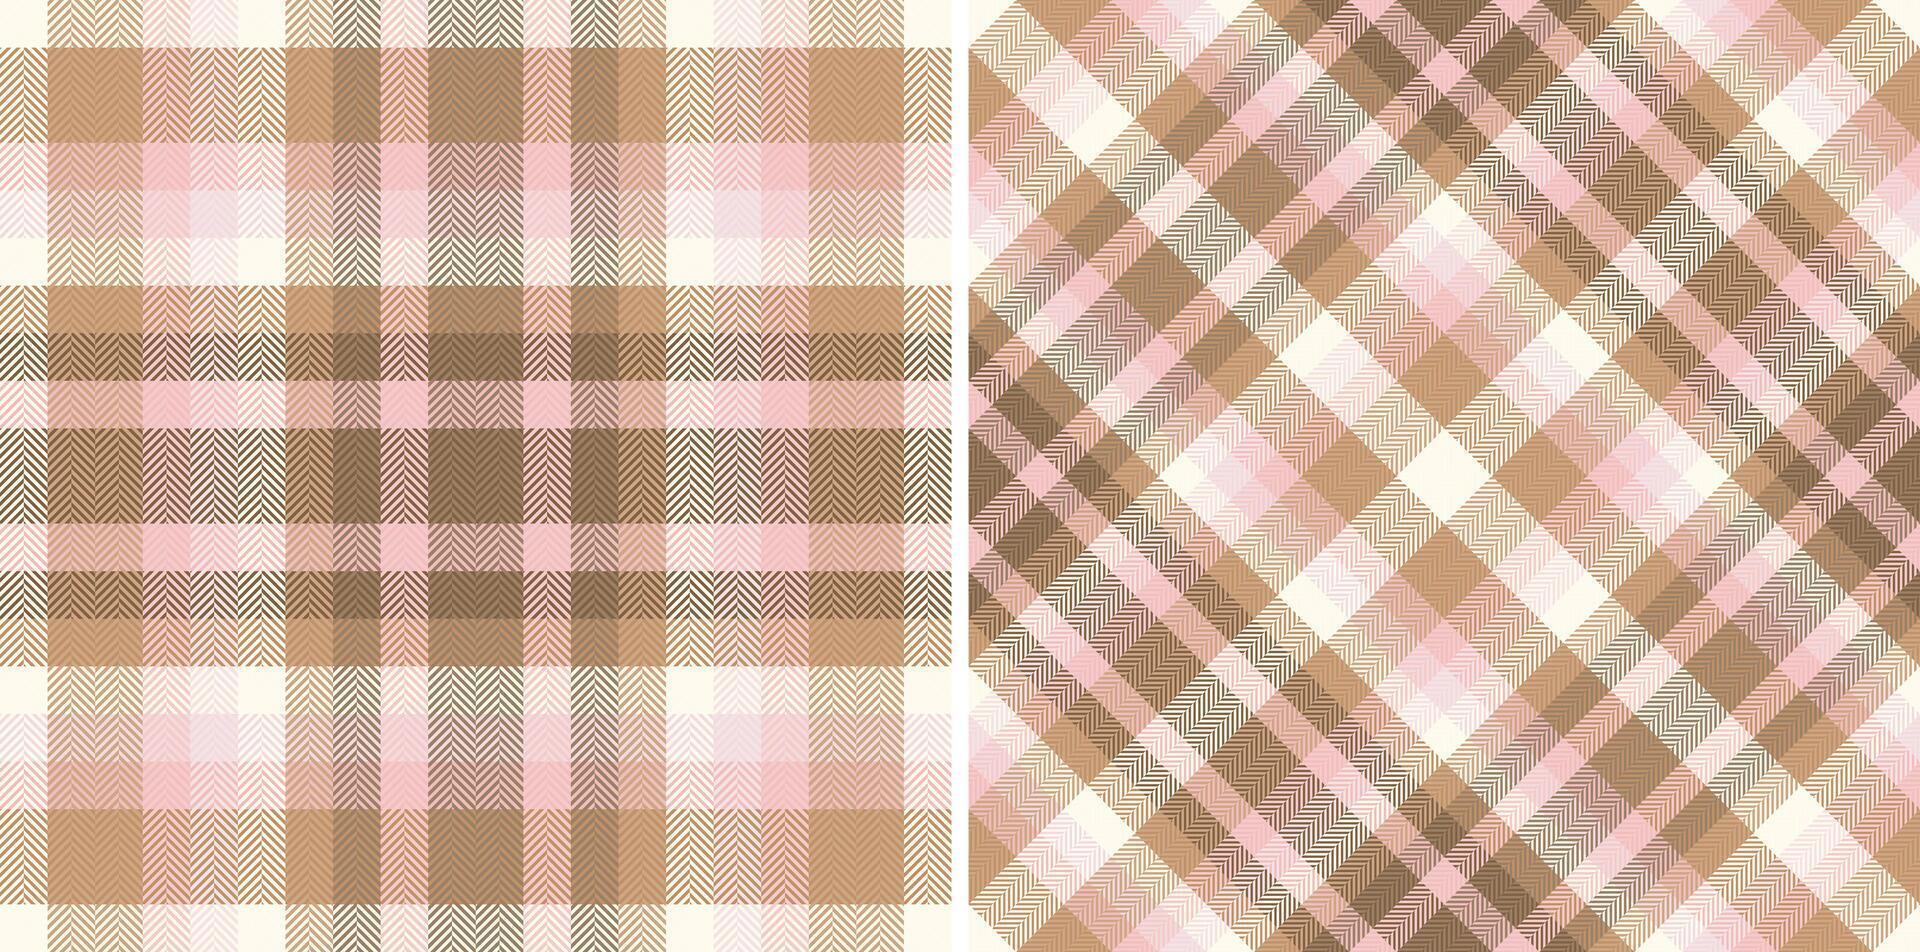 Background texture pattern of seamless plaid fabric with a tartan vector check textile.